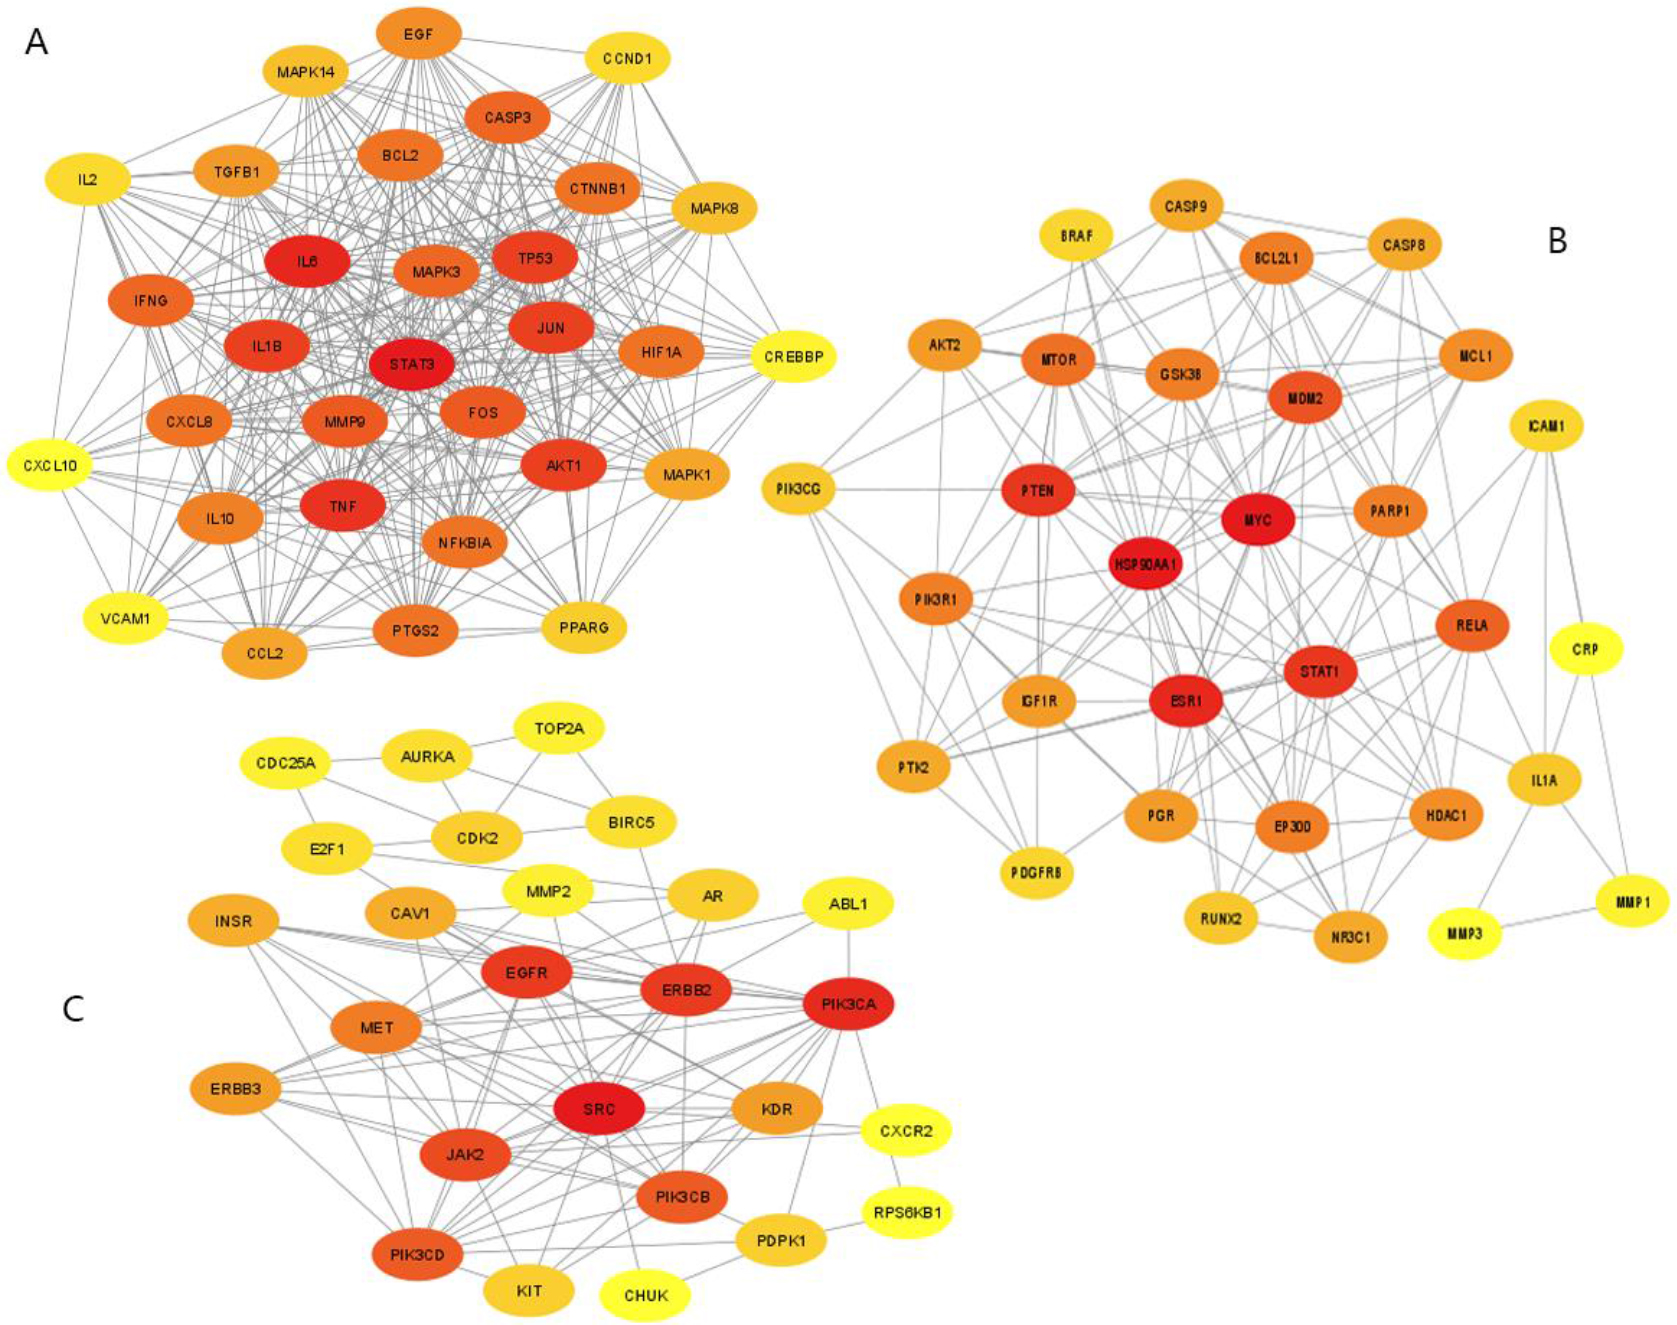 Representative map of protein-protein cluster network. The darker the red color, the stronger the correlation. (A) One protein-protein cluster with 31 nodes and 337 edges. (B) One protein-protein cluster with 31 nodes and 149 edges. (C) One protein-protein cluster with 26 nodes and 93 edges.